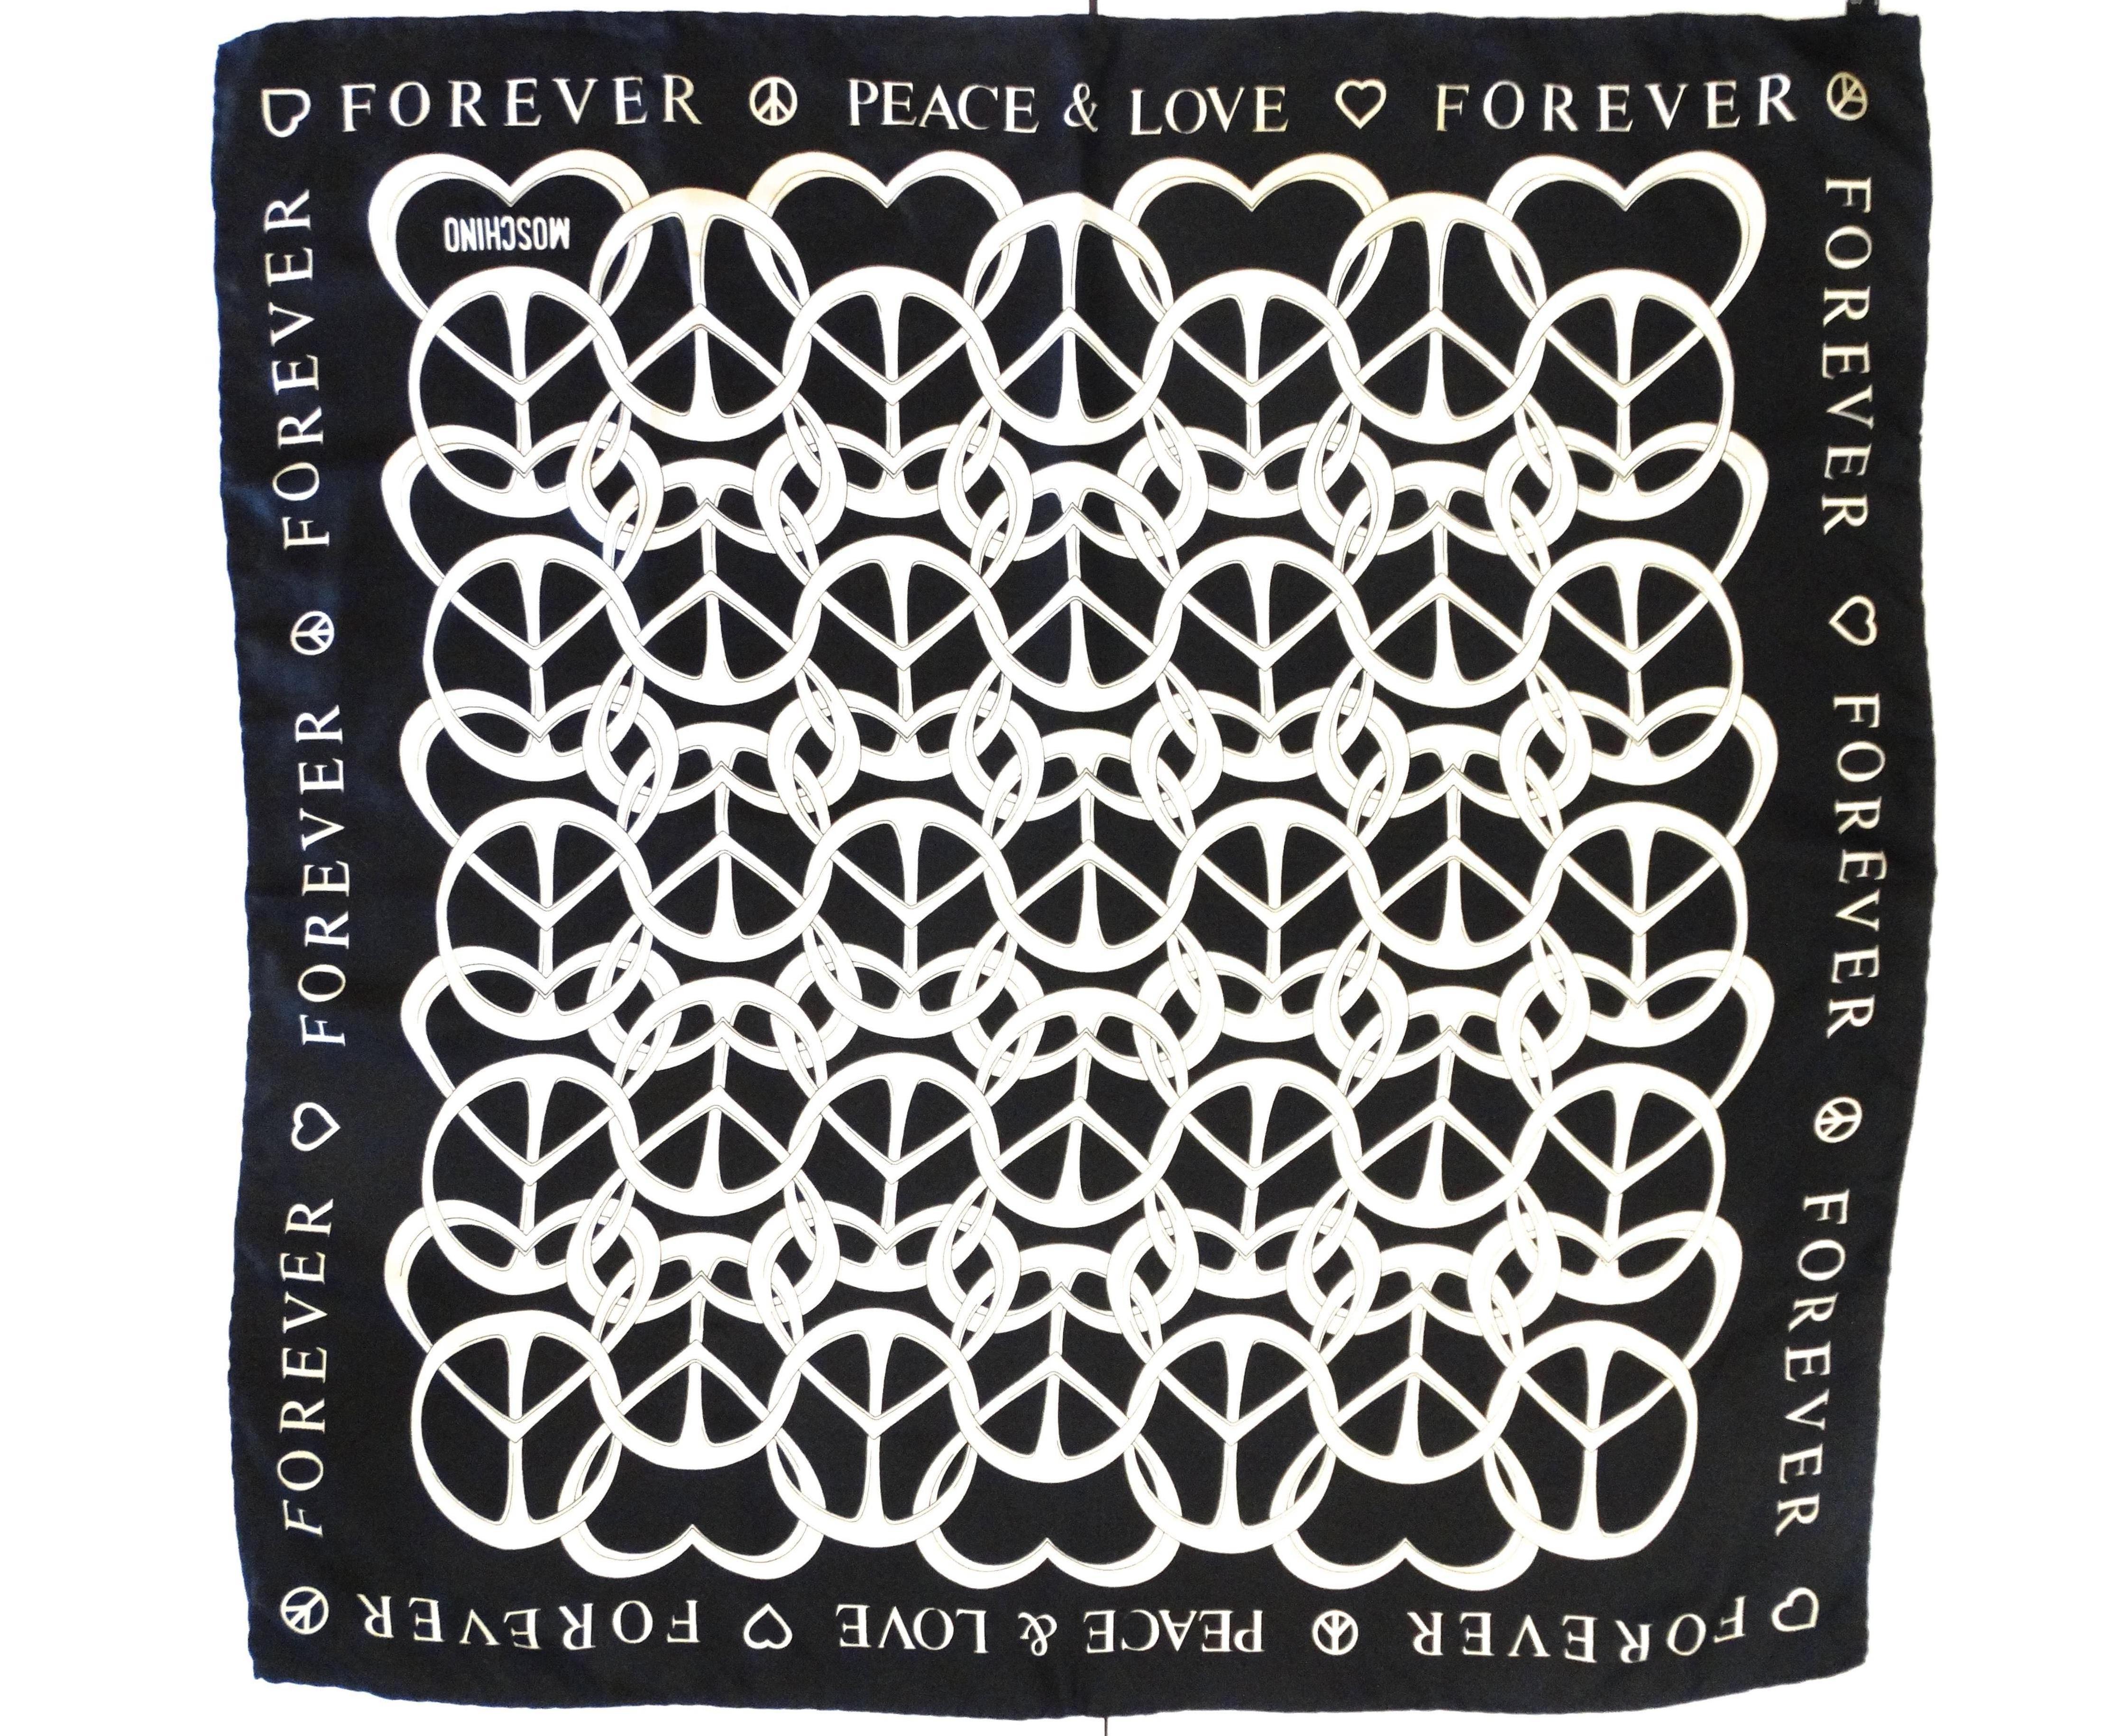 Black Moschino 90s 'Peace & Love Forever' Large Silk Scarf